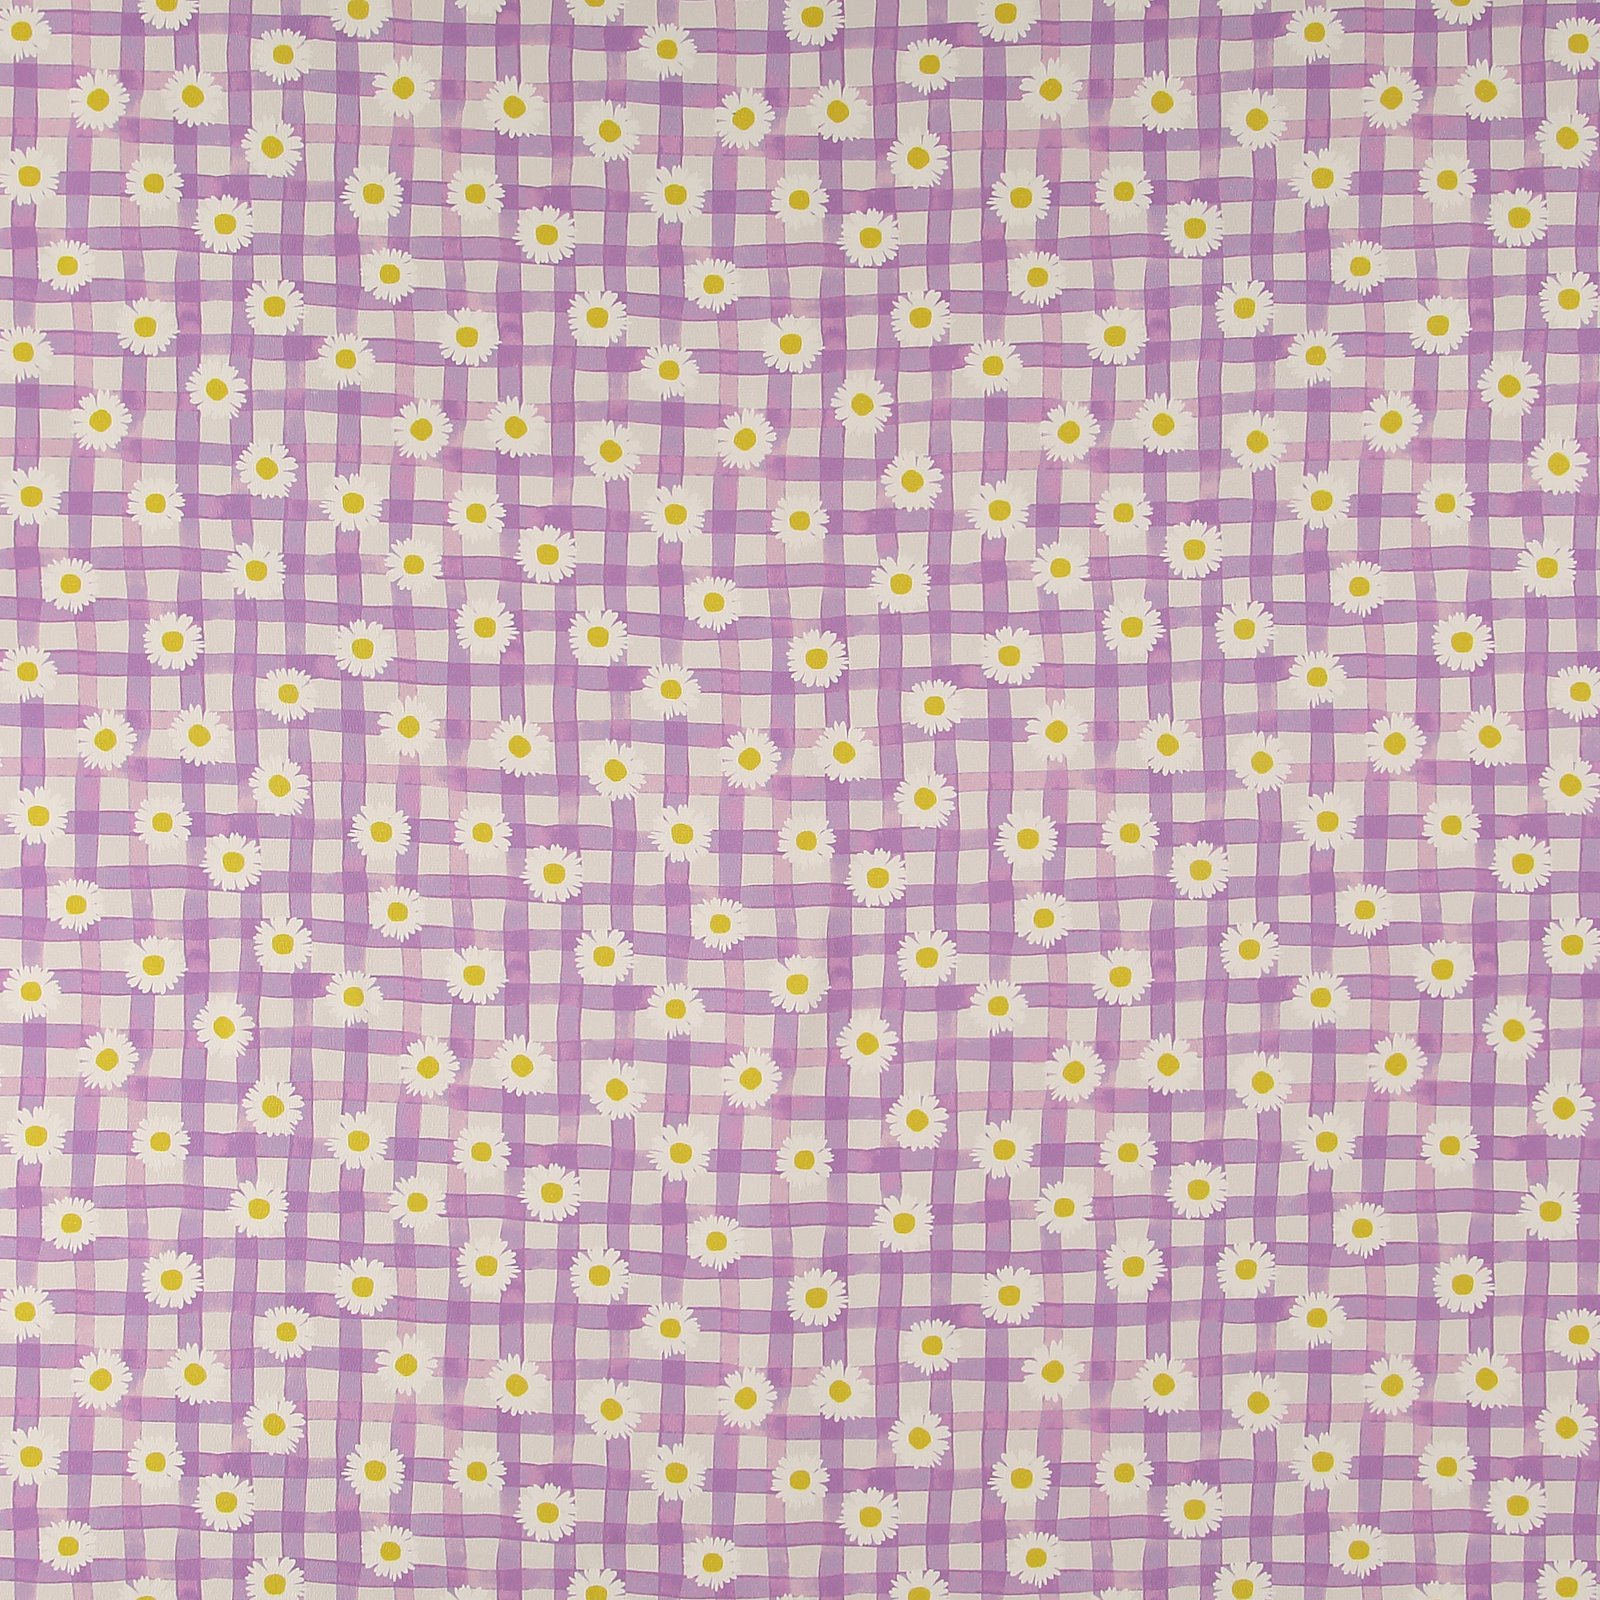 Woven light crepe purple check w daisy 560262_pack_sp